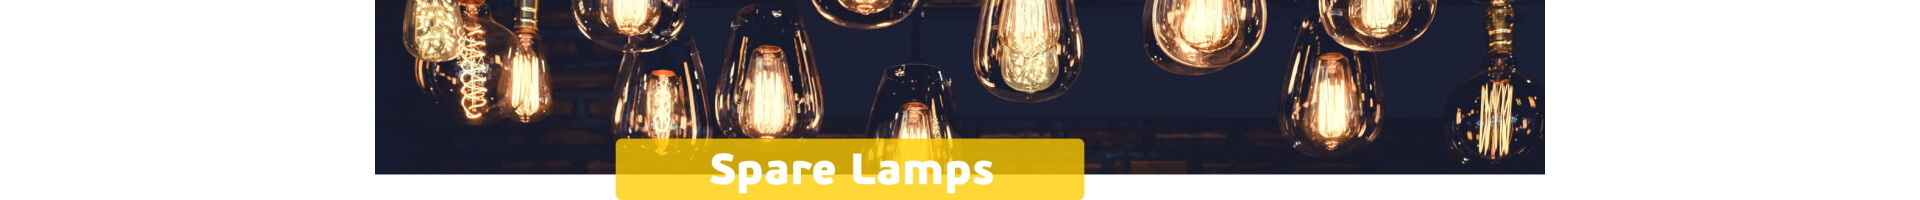 Spare Lamps